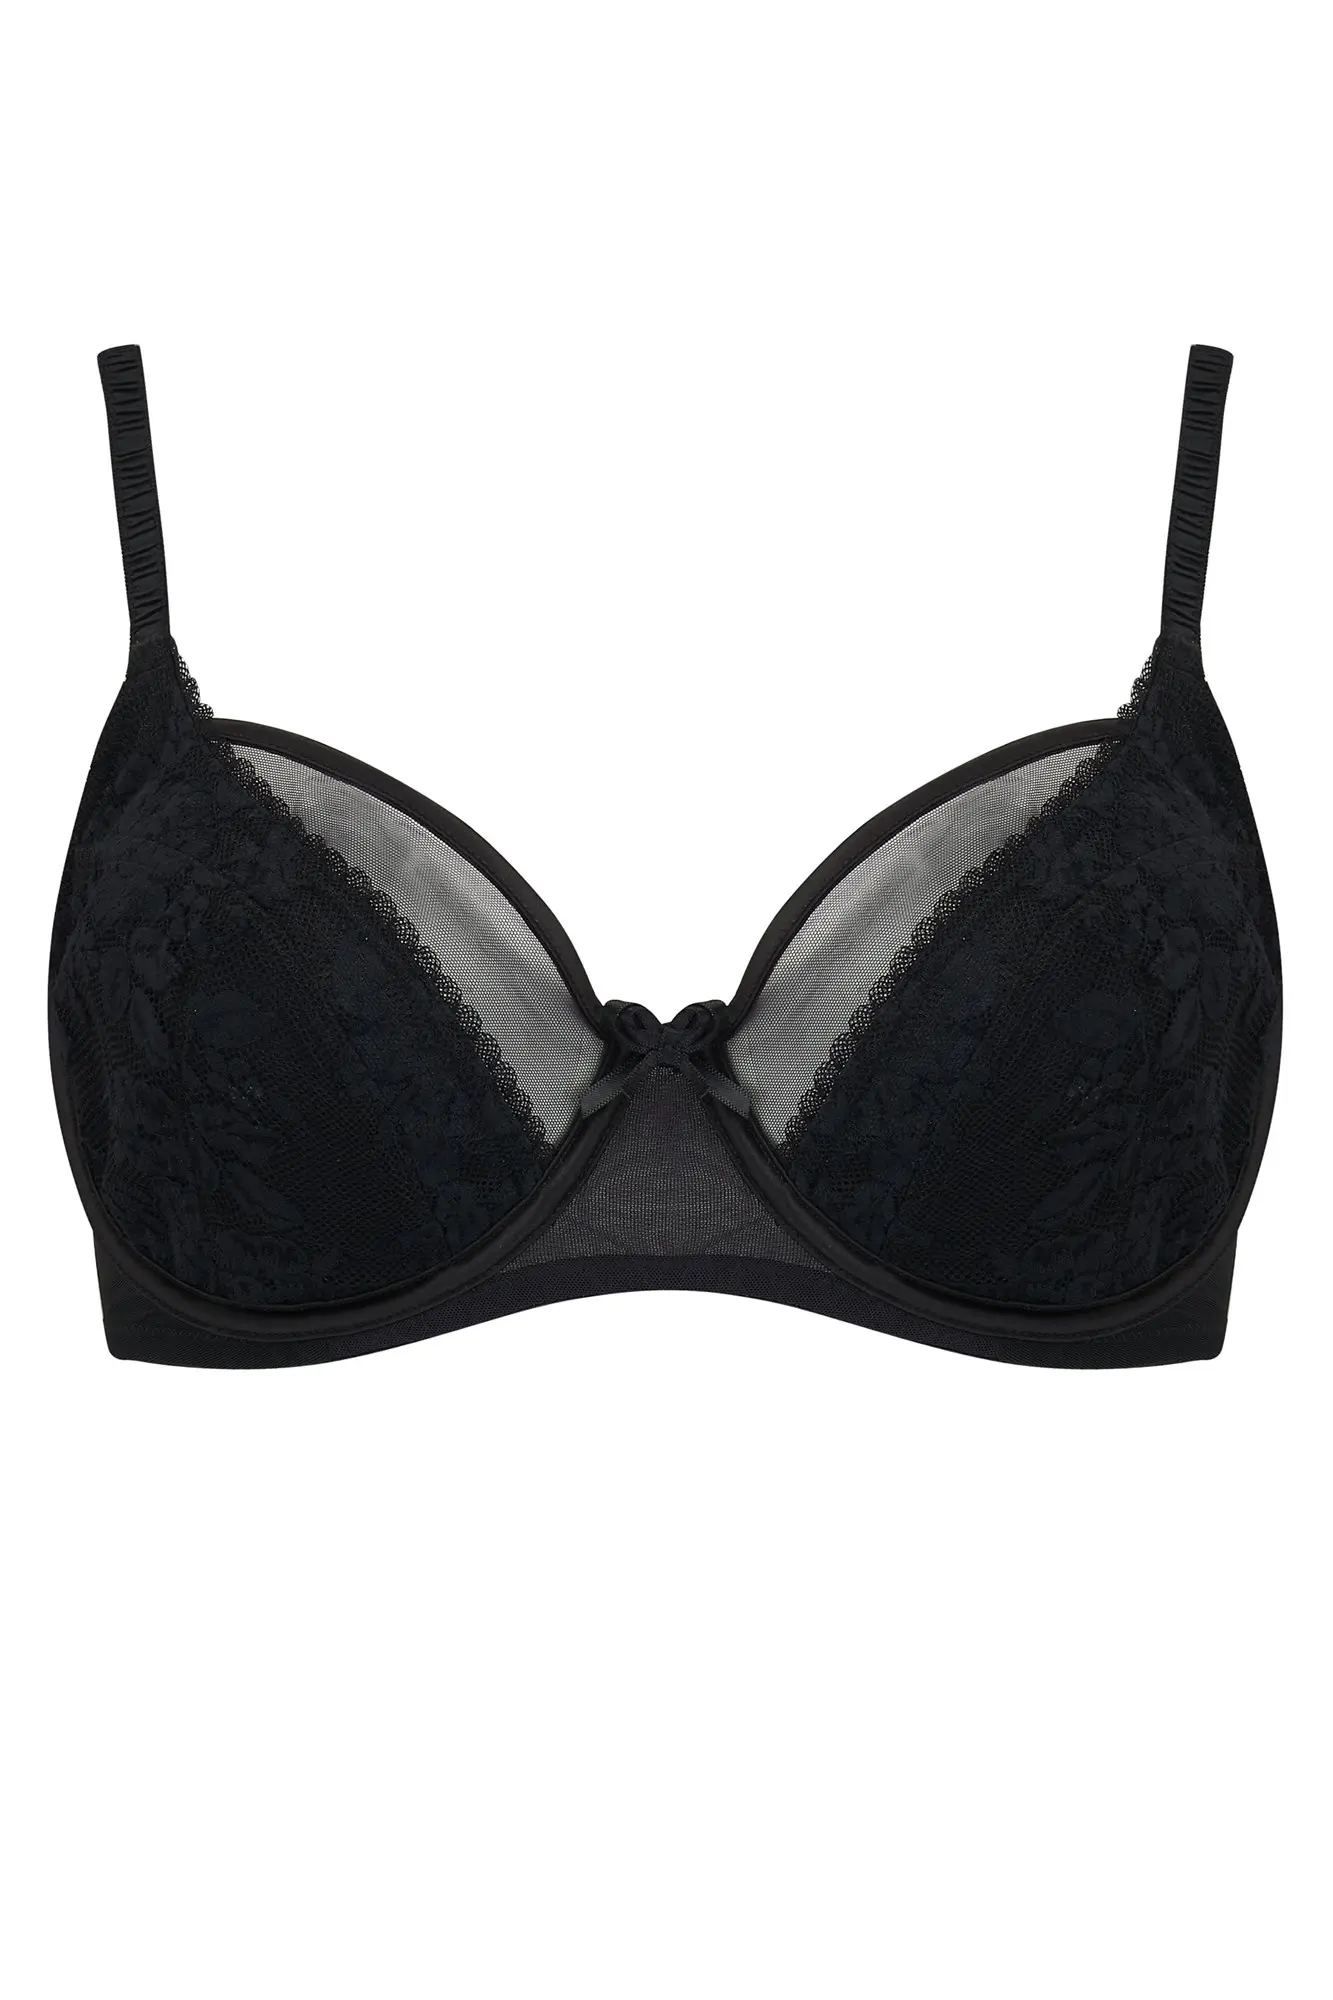 Muse Underwired Bra | Pour Moi | Muse Underwired Bra | Black | Pour Moi